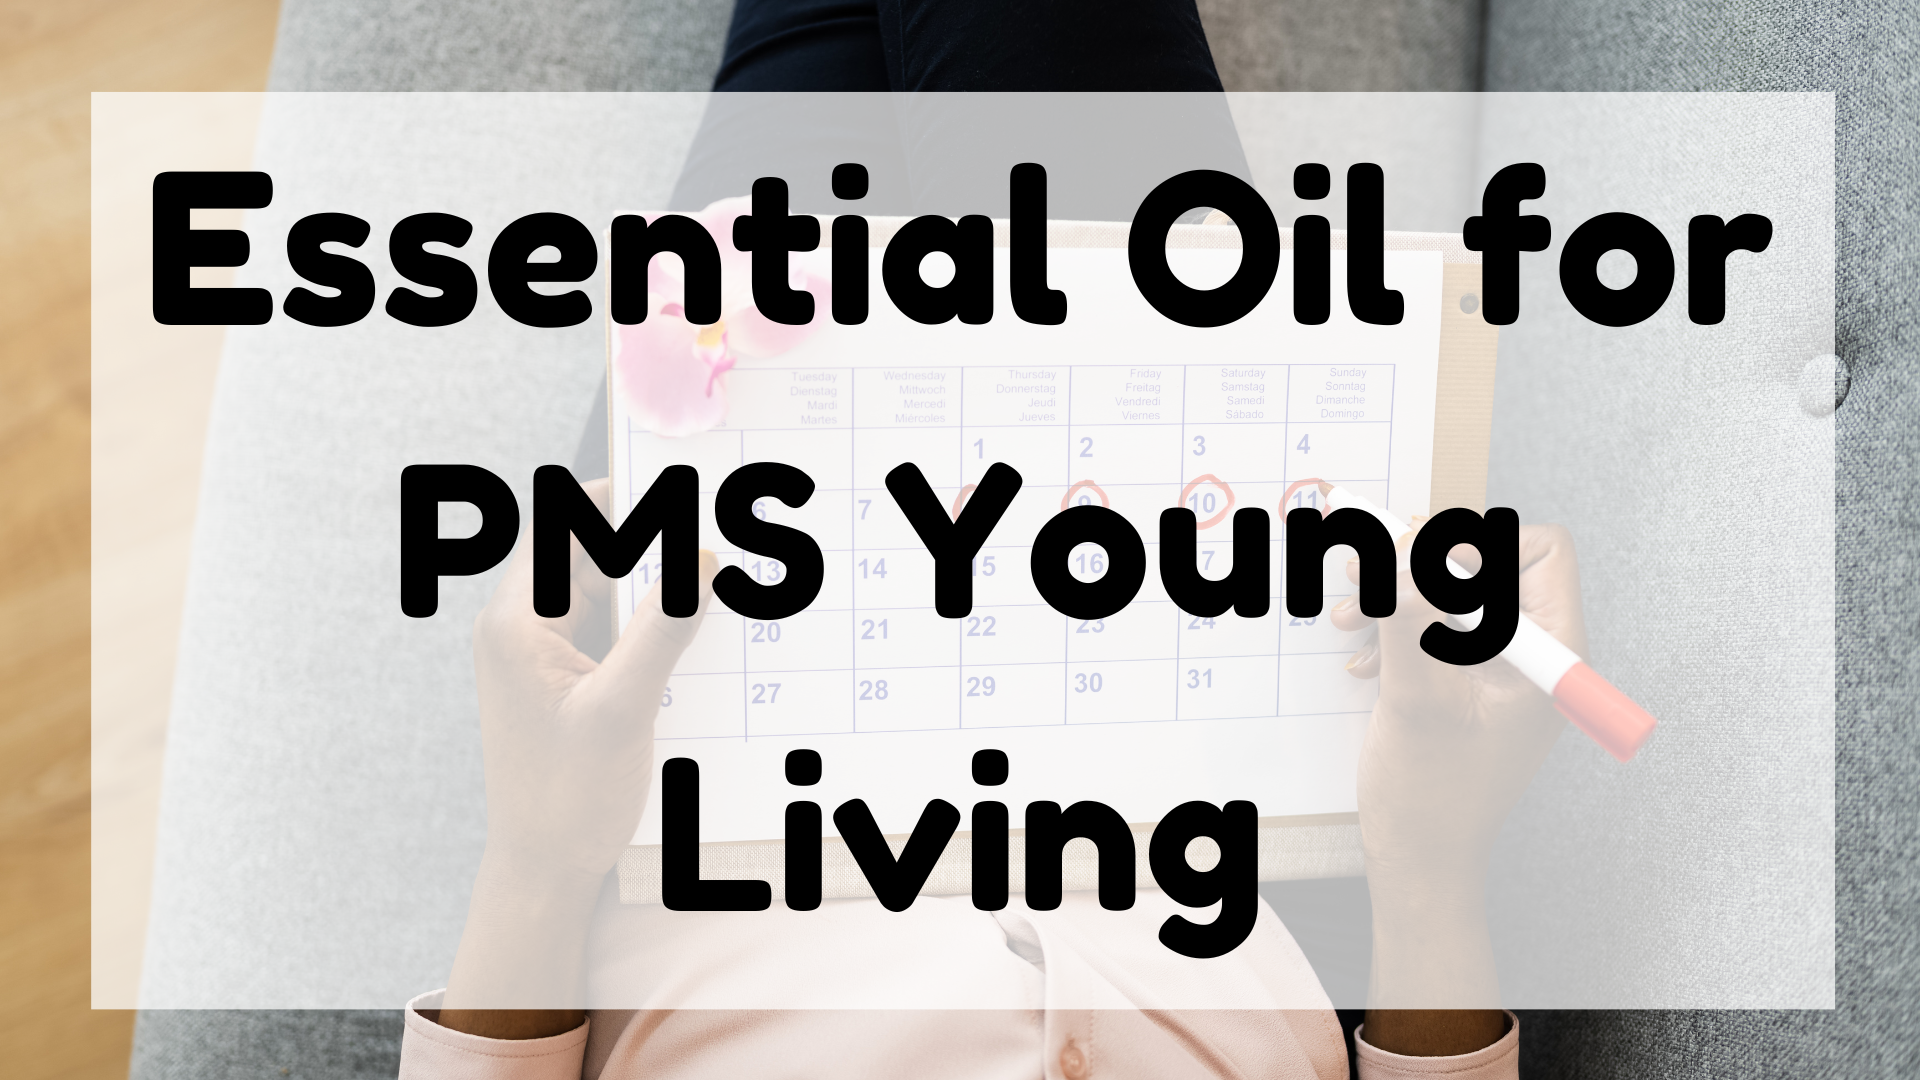 Essential Oil for Pms Young Living featured image